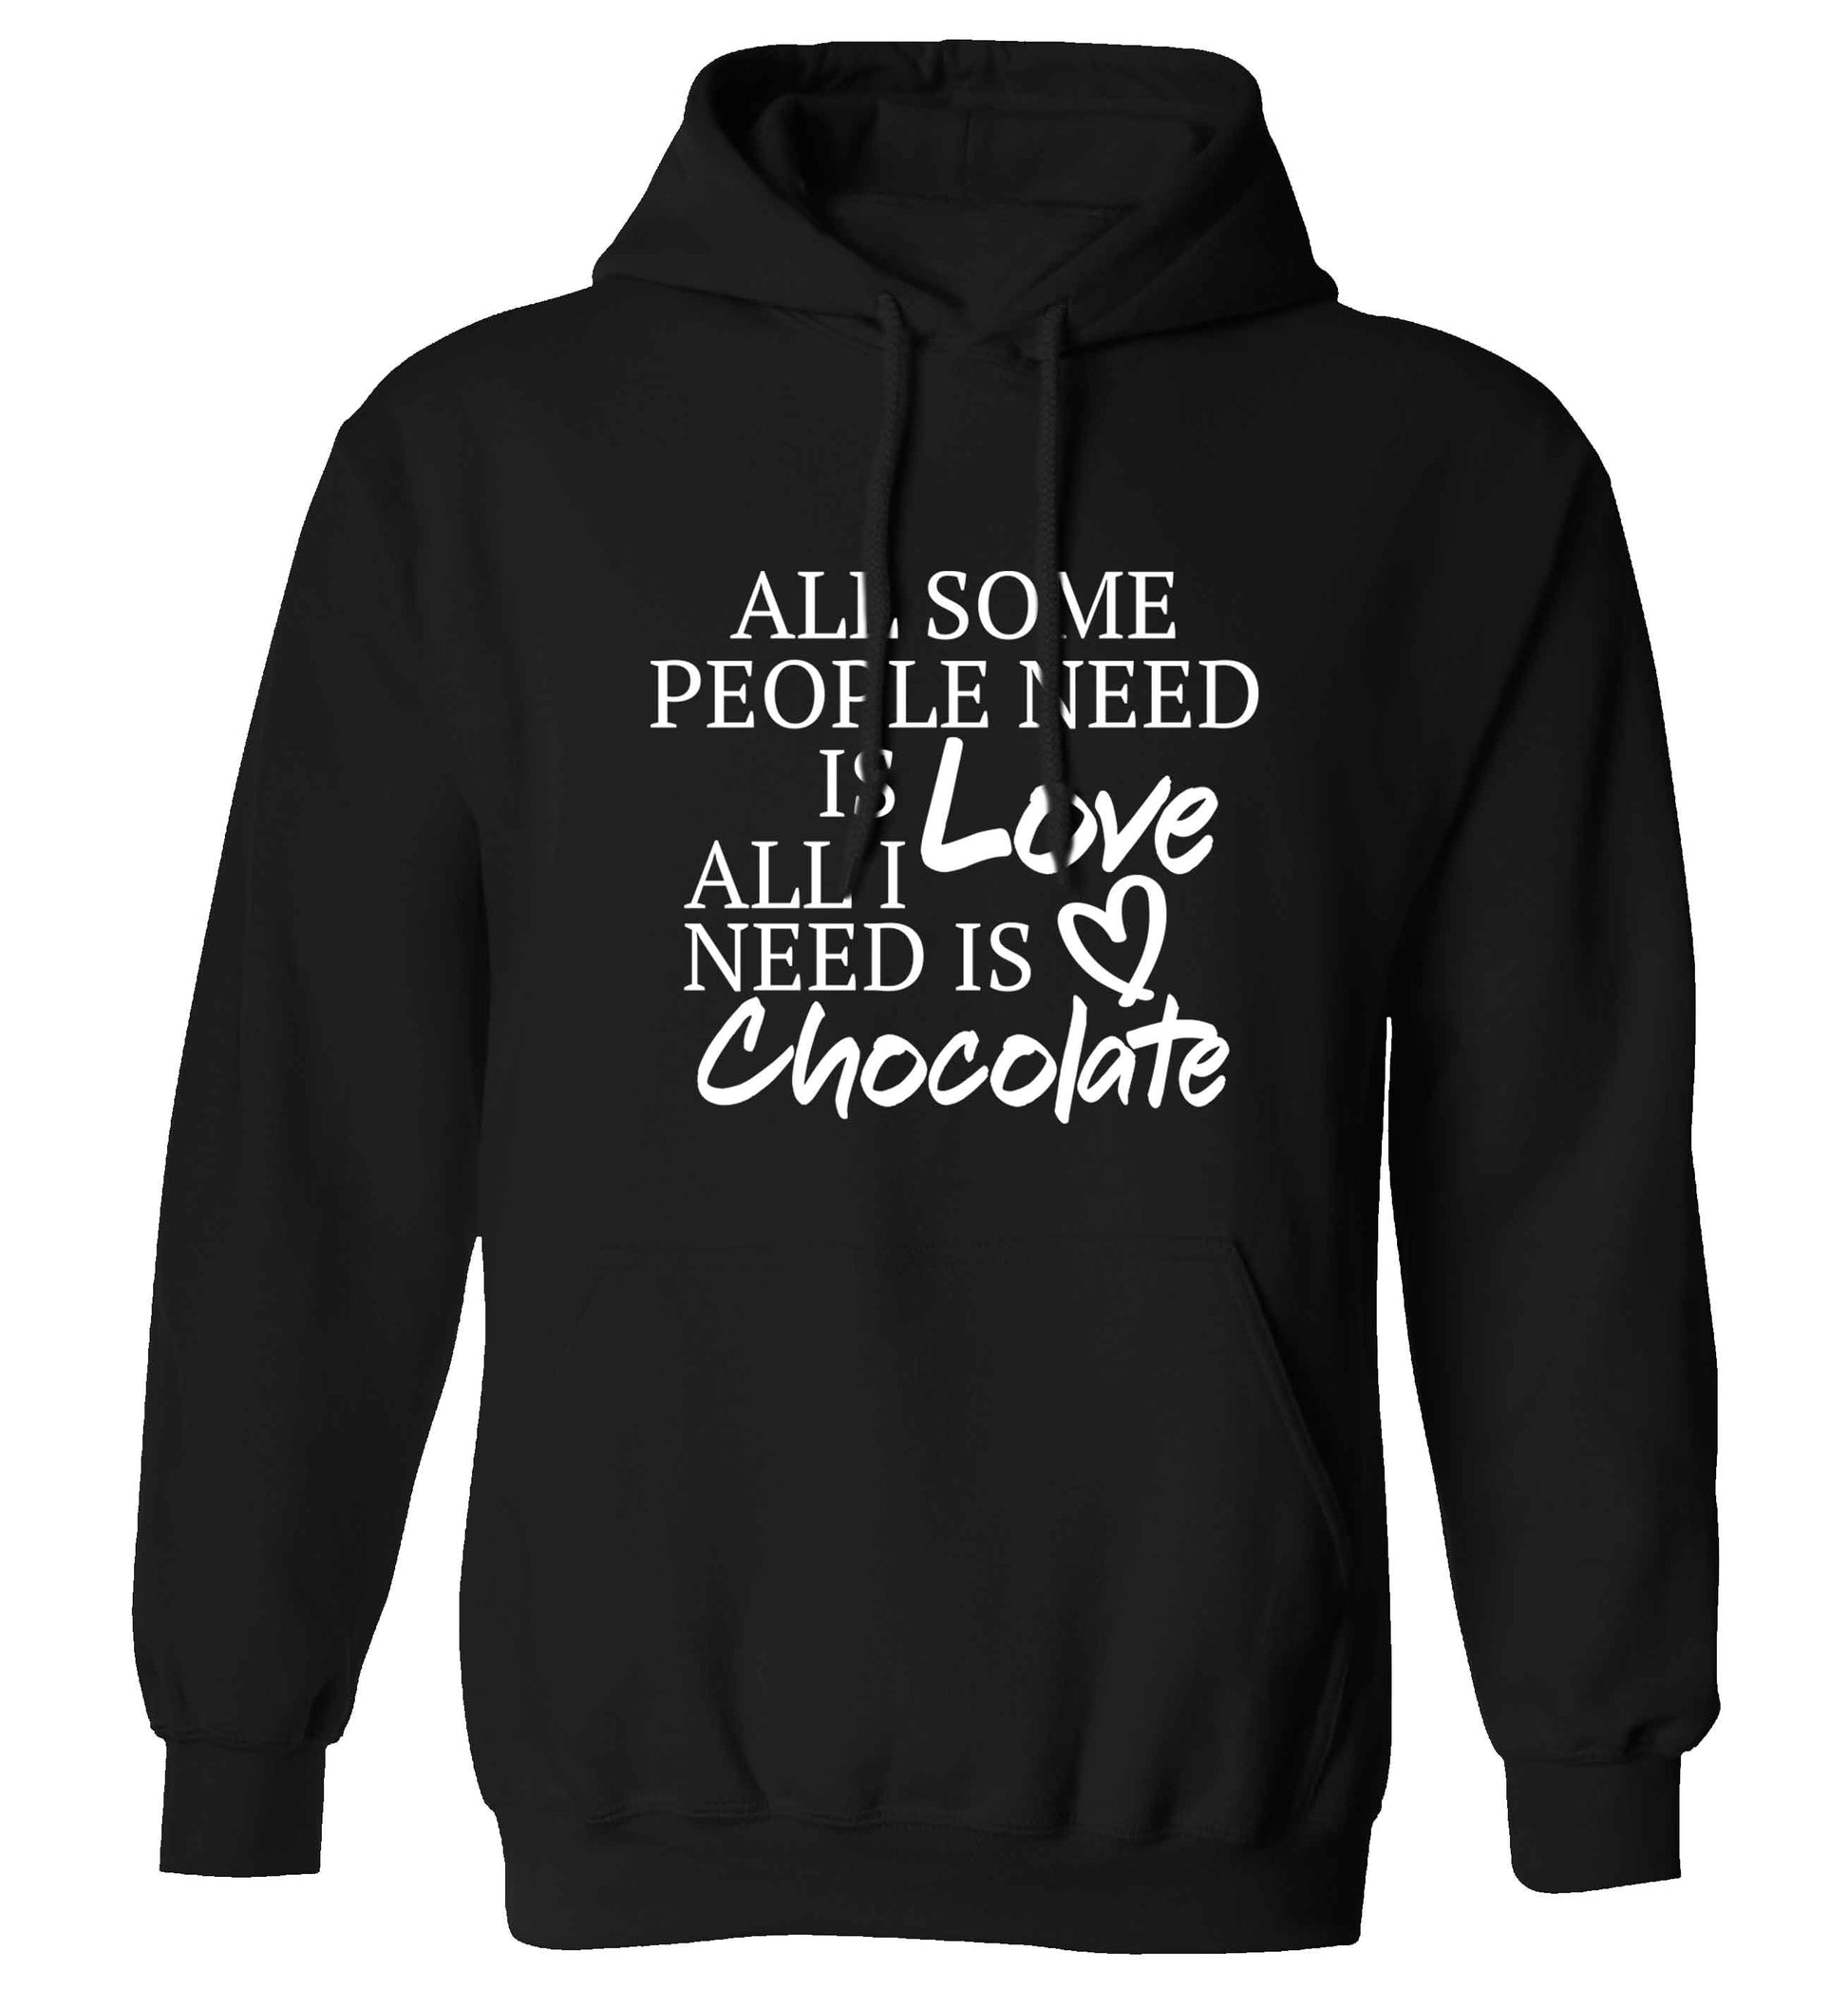 All some people need is love all I need is chocolate adults unisex black hoodie 2XL